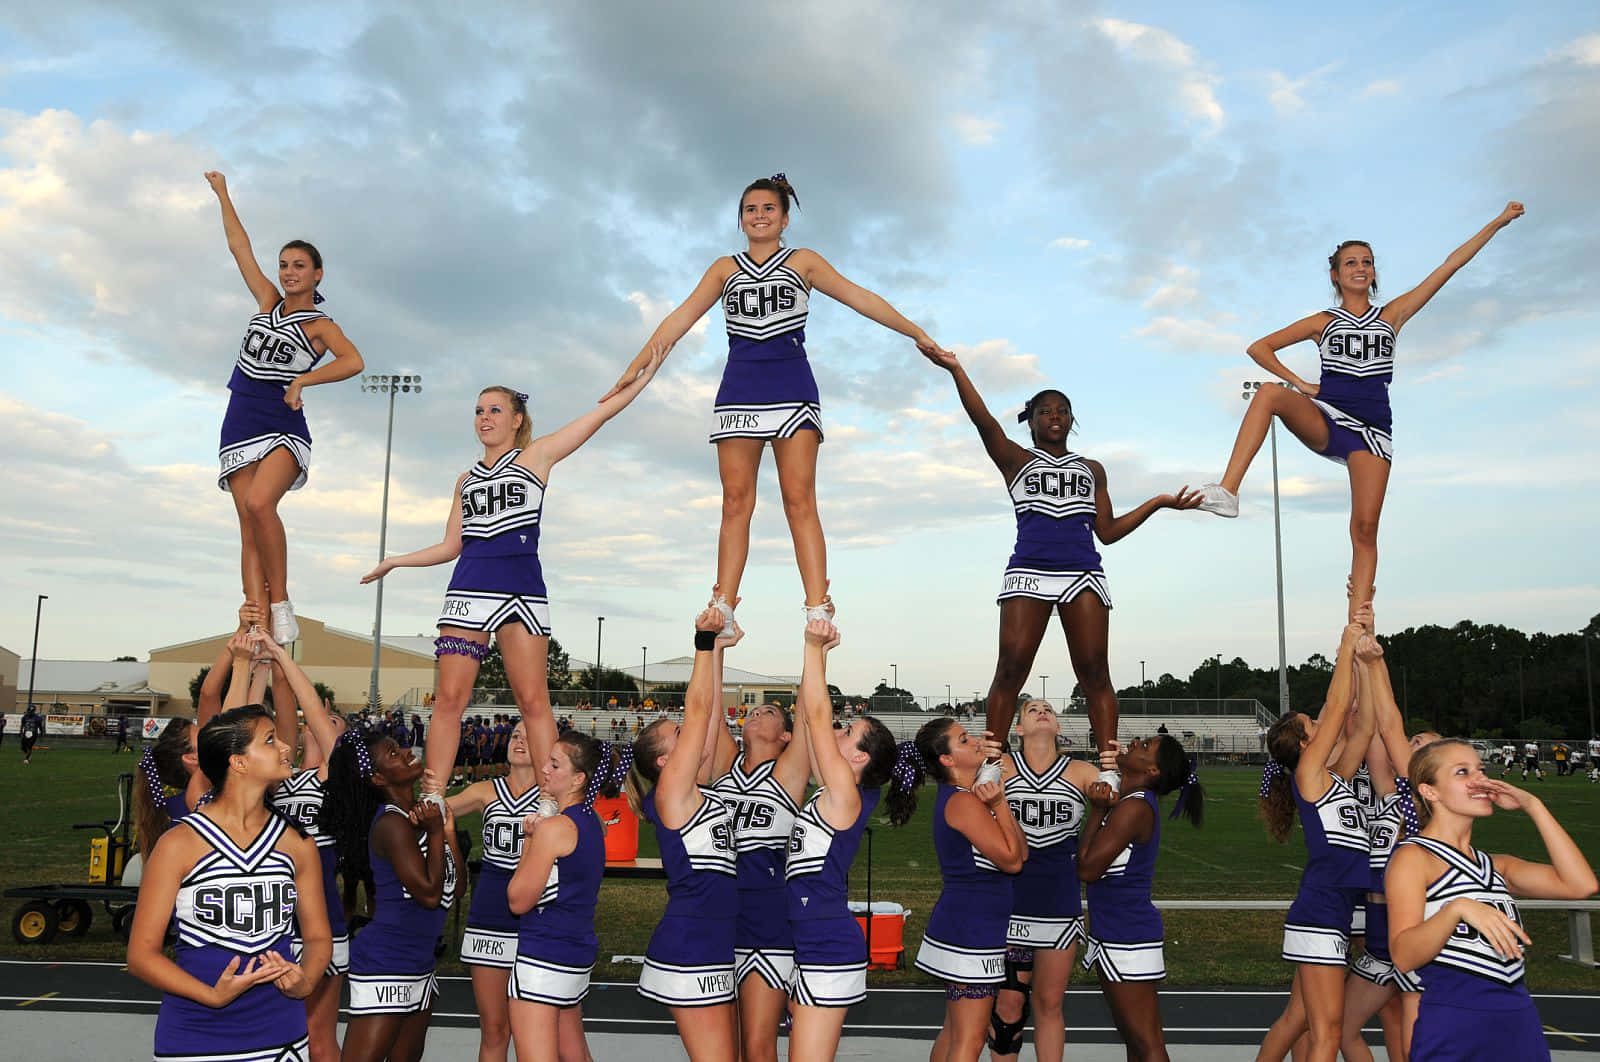 Cheerleaders Human Tower Formation Picture